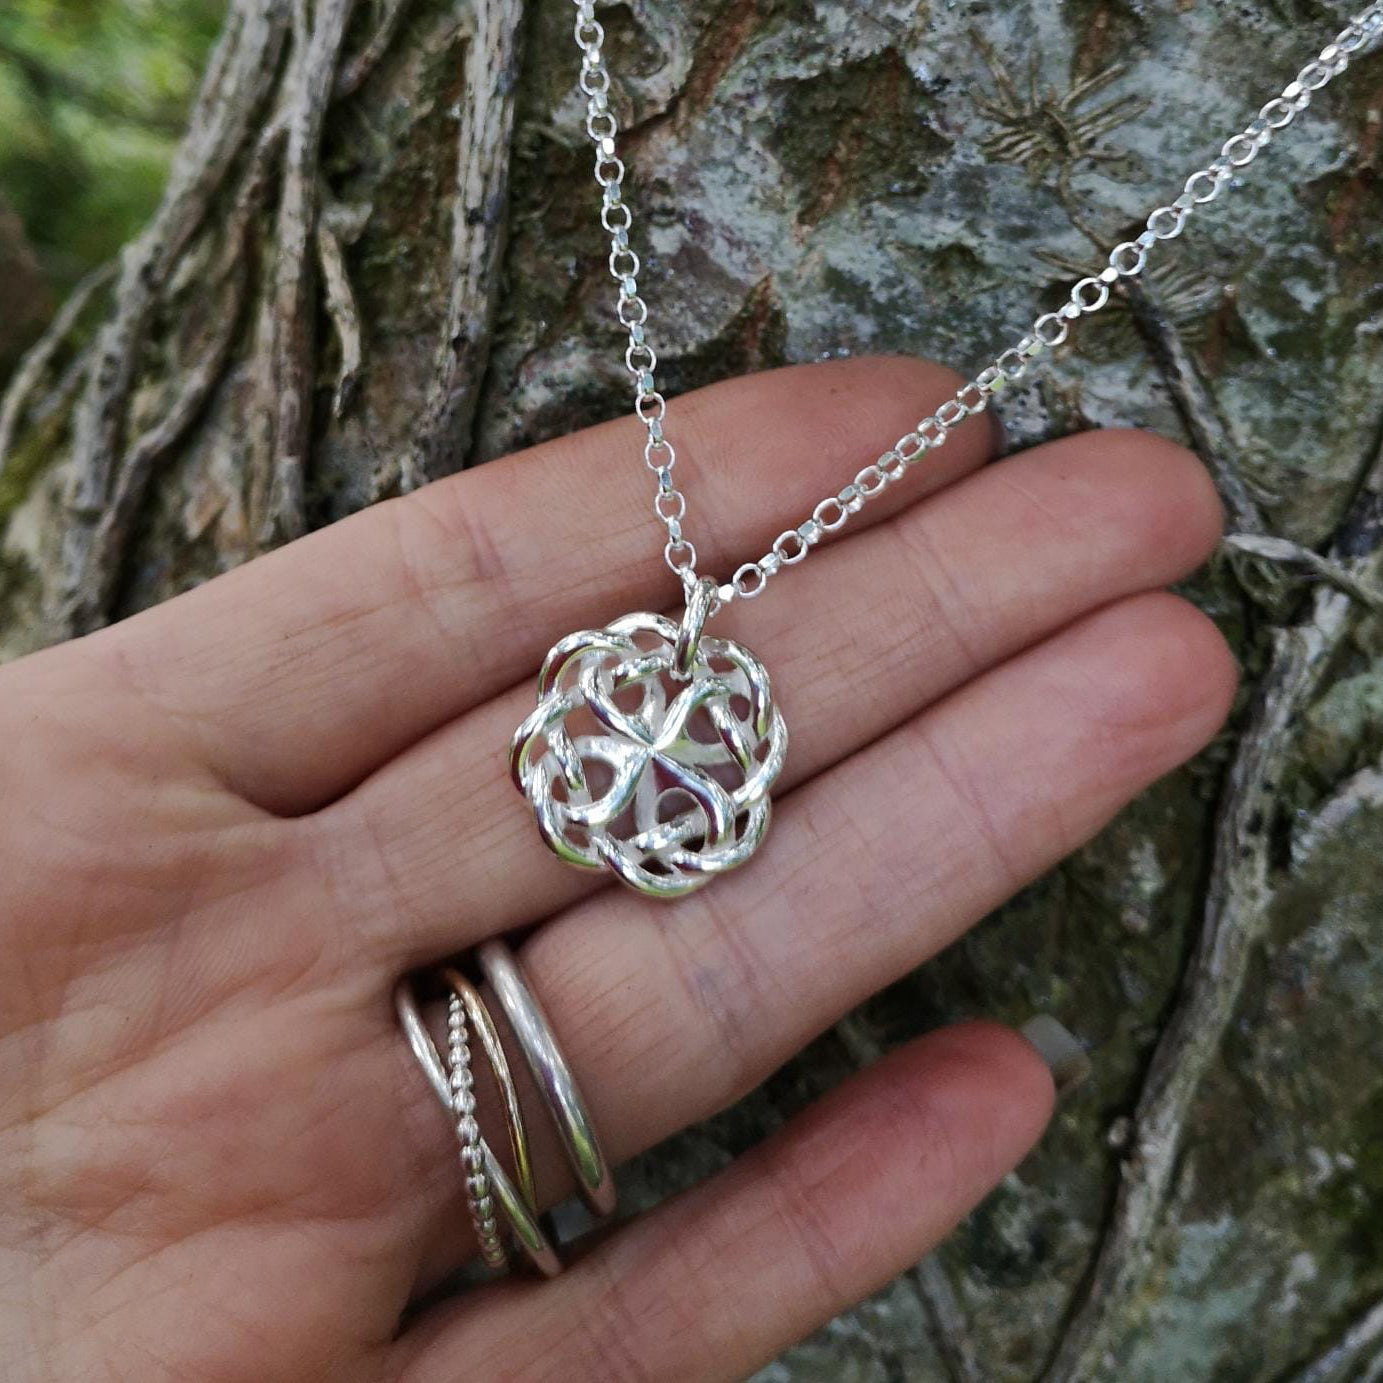 The Celtic Love Knot pendant is handmade from sterling silver and crafted in Ireland. This Celtic knot jewelry piece is perched against tree bark